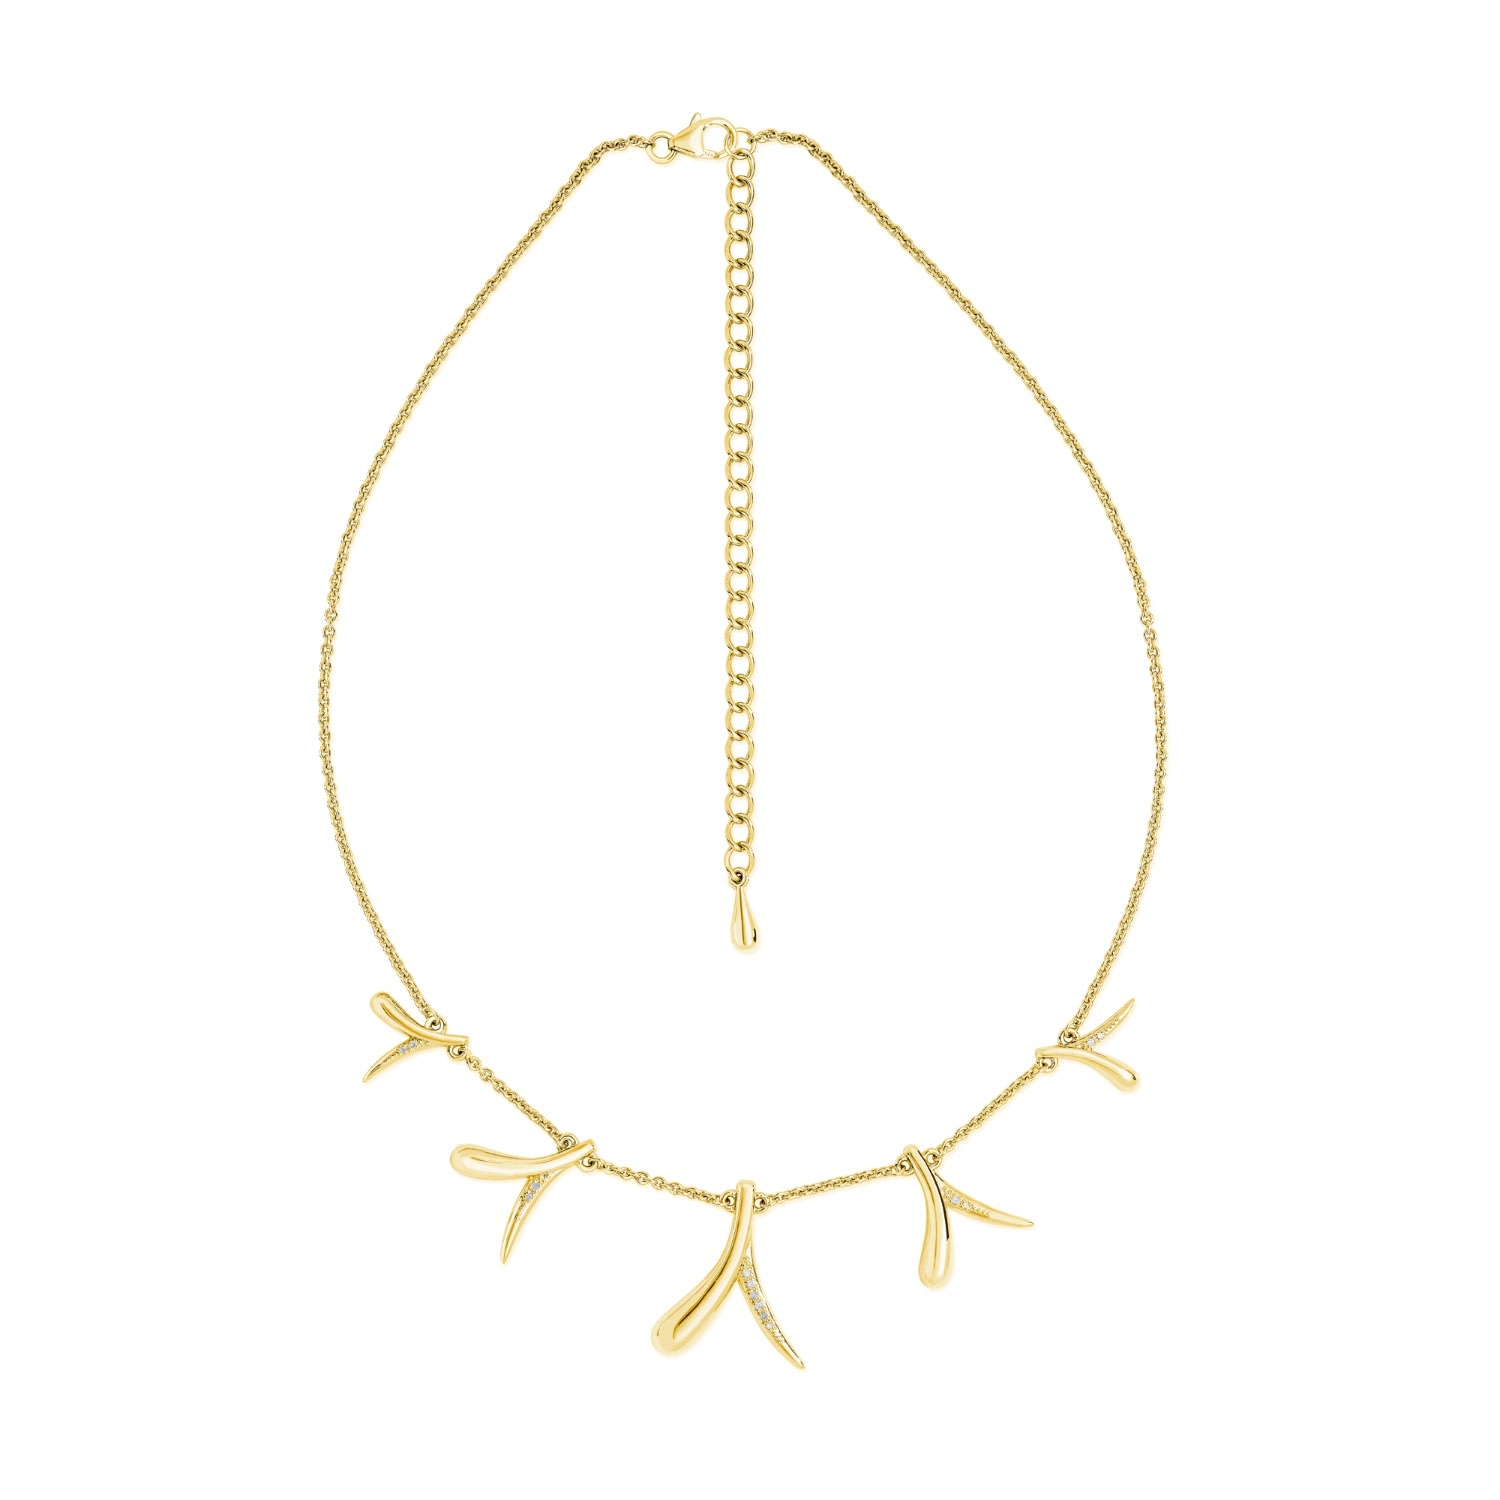 Lucy Quartermaine Women's Sycamore Station Necklace In Gold Vermeil